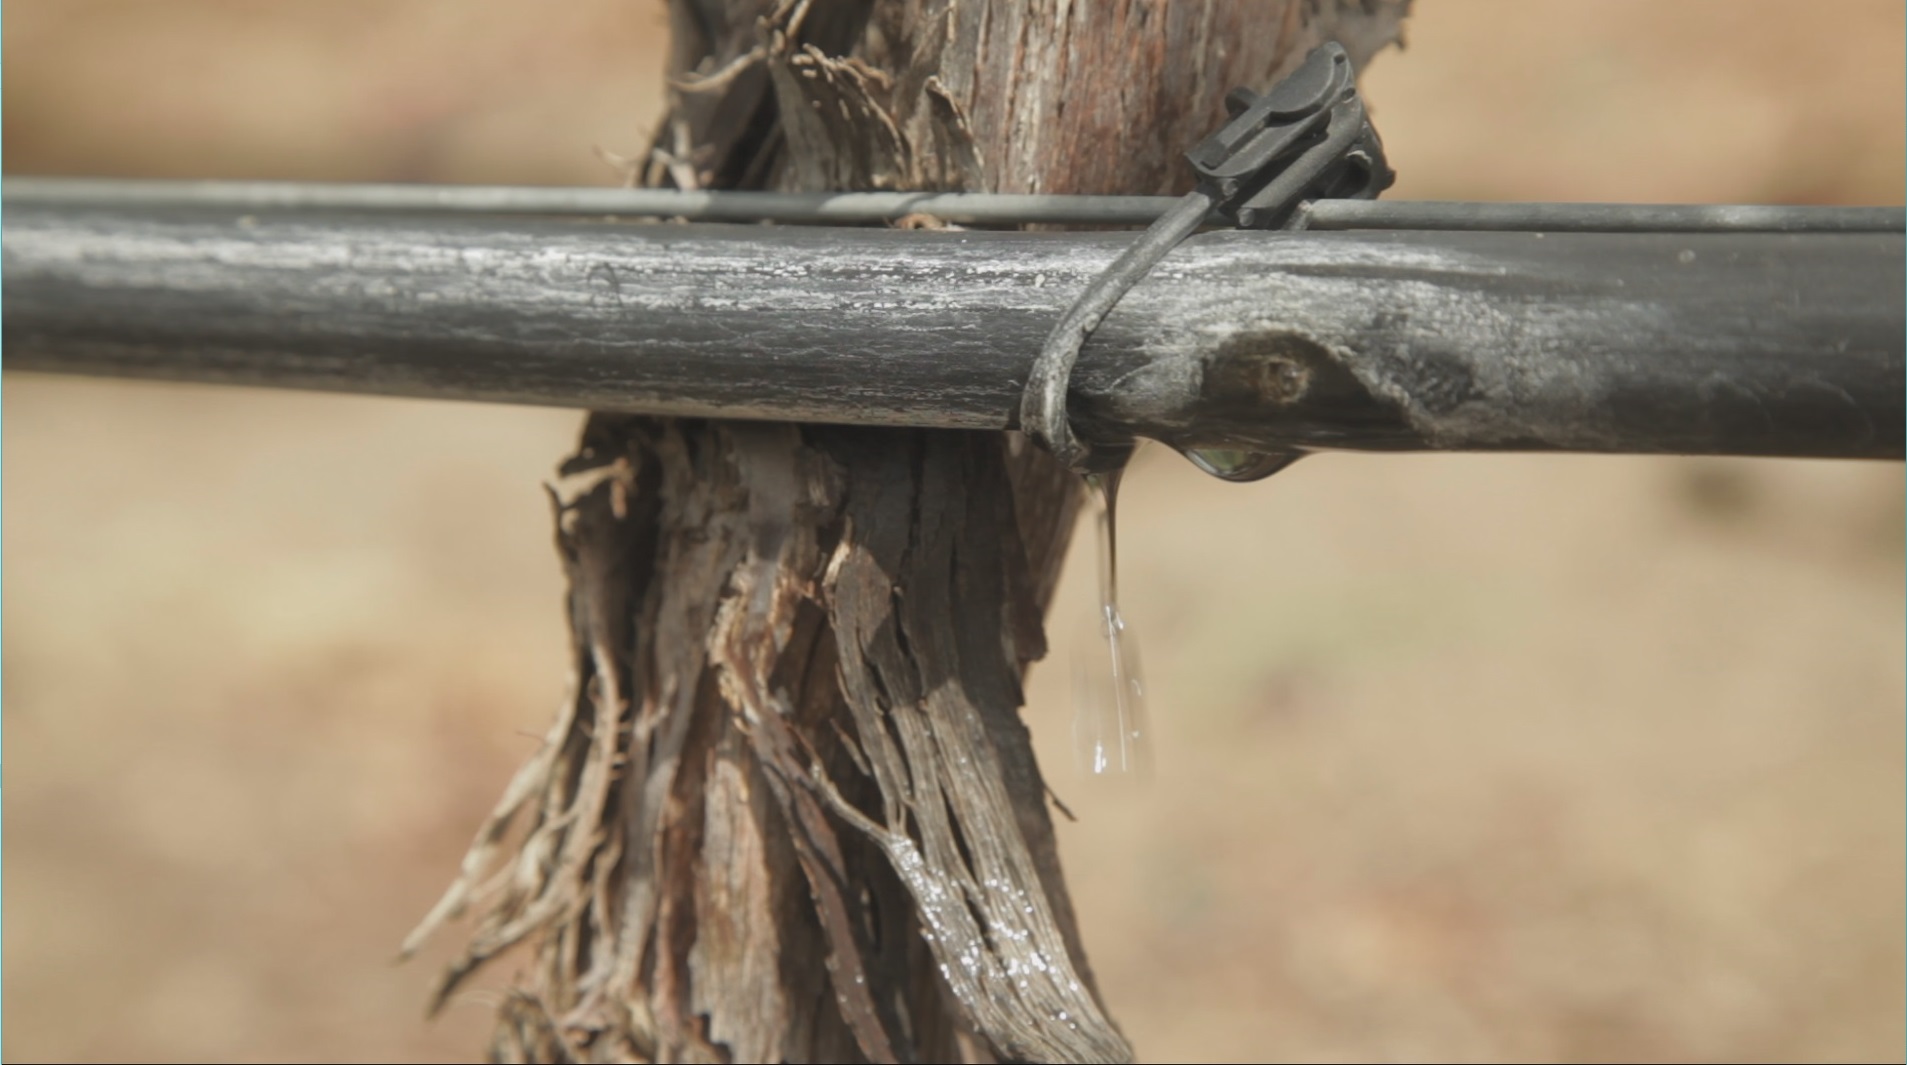 A weathered pipe tied to a grape trunk drips water